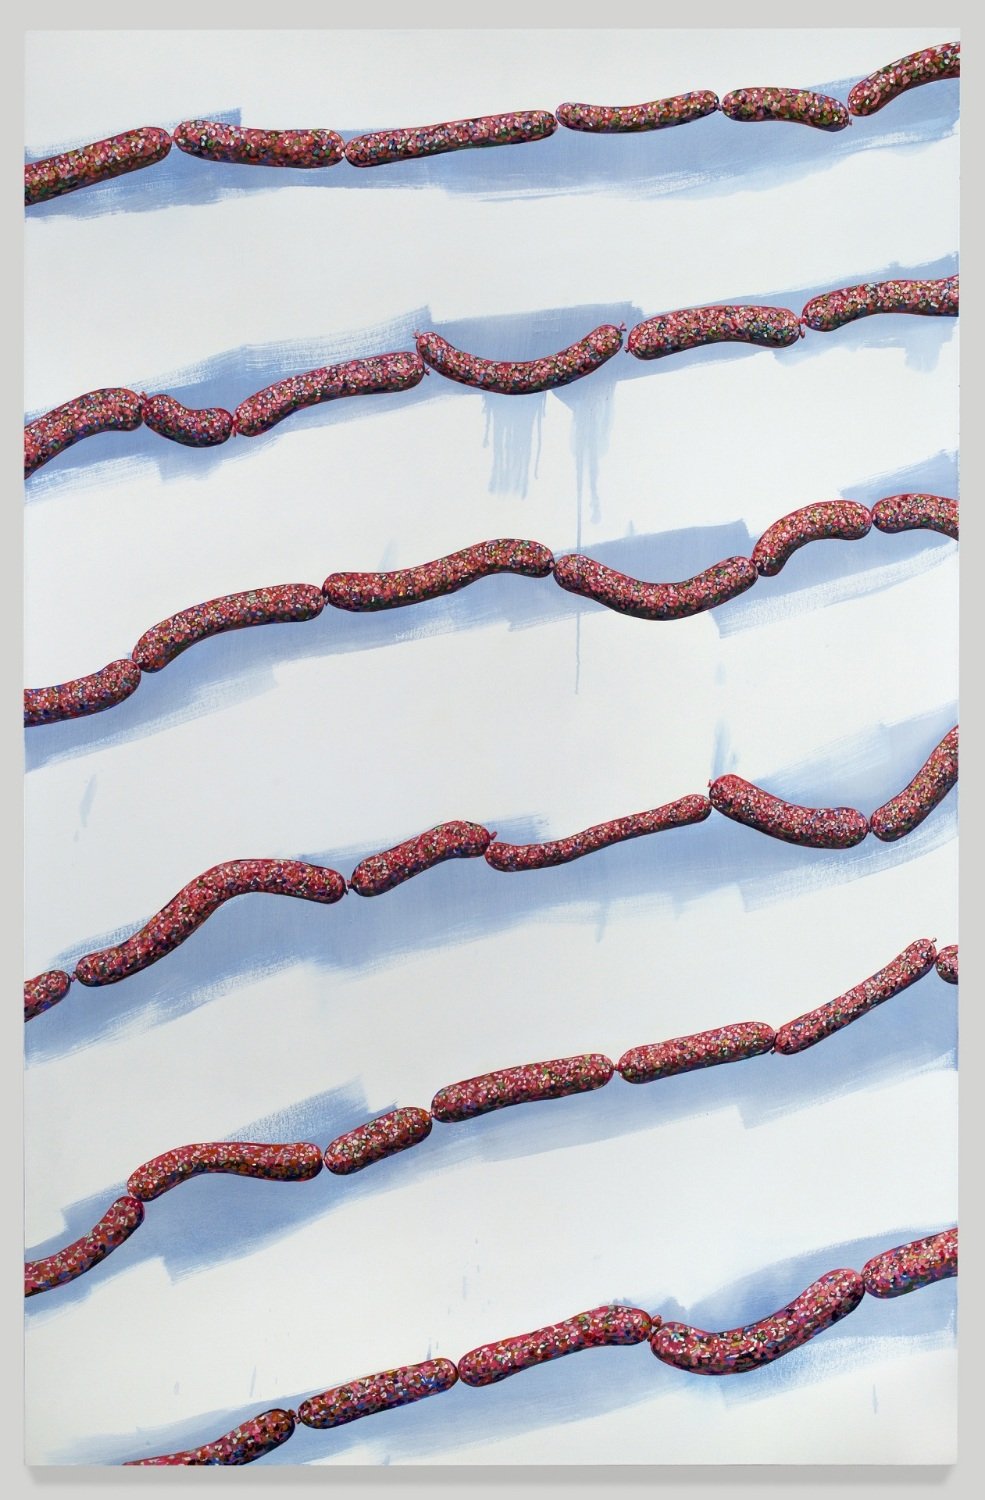  Untitled (The Production Line of Happiness I), 2015  Oil on canvas  Installed at This Condition at Regina Rex  &nbsp; http://reginarex.org/exhibition.asp?exID=561  